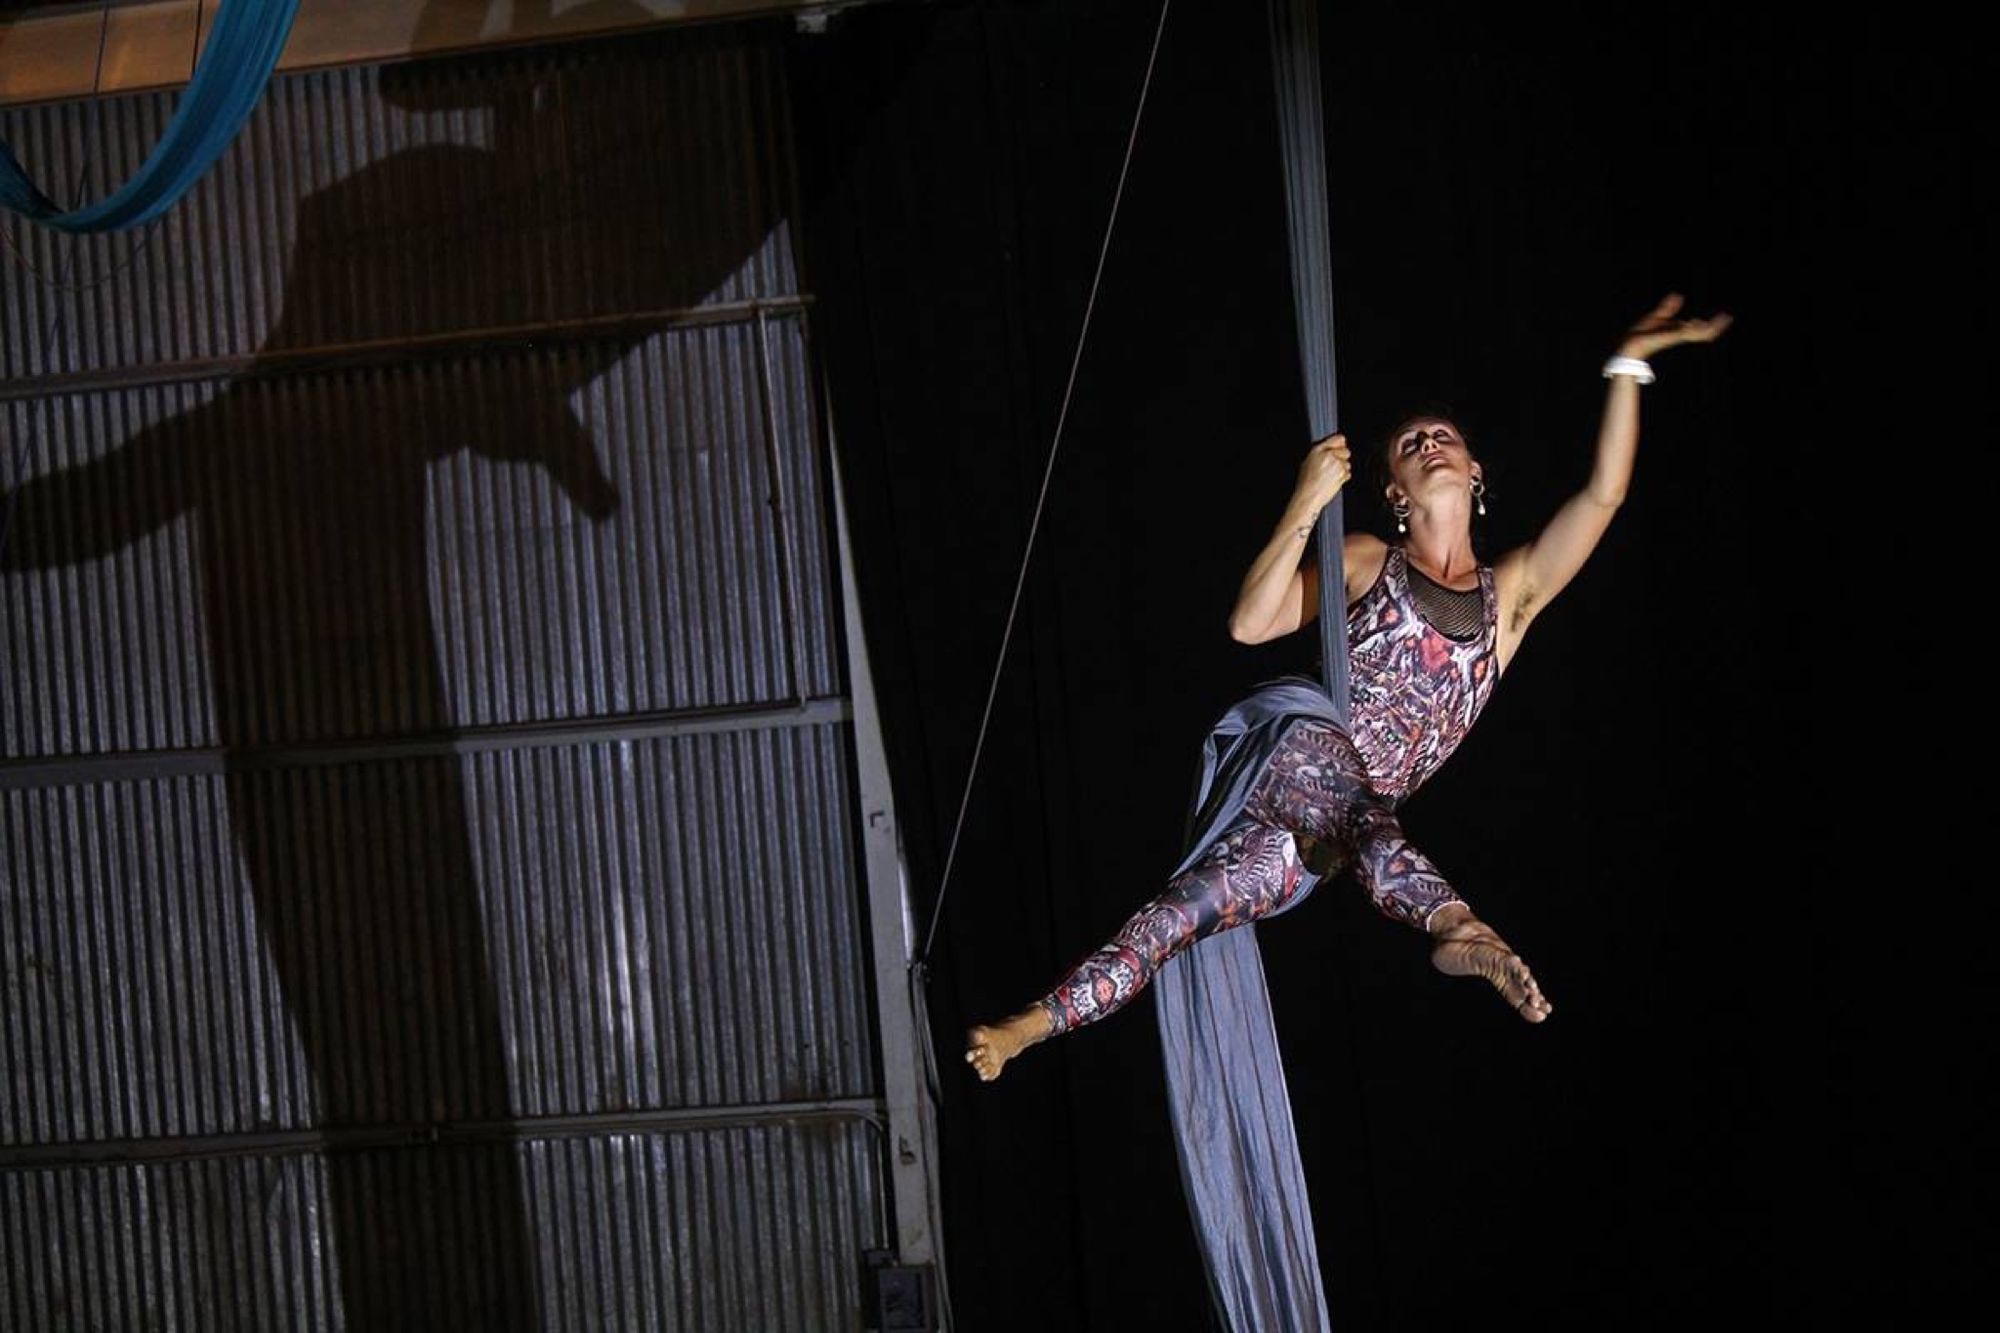 Woman wearing psychedelic print unitard doing aerial acrobatics on grey fabric in a metal warehouse